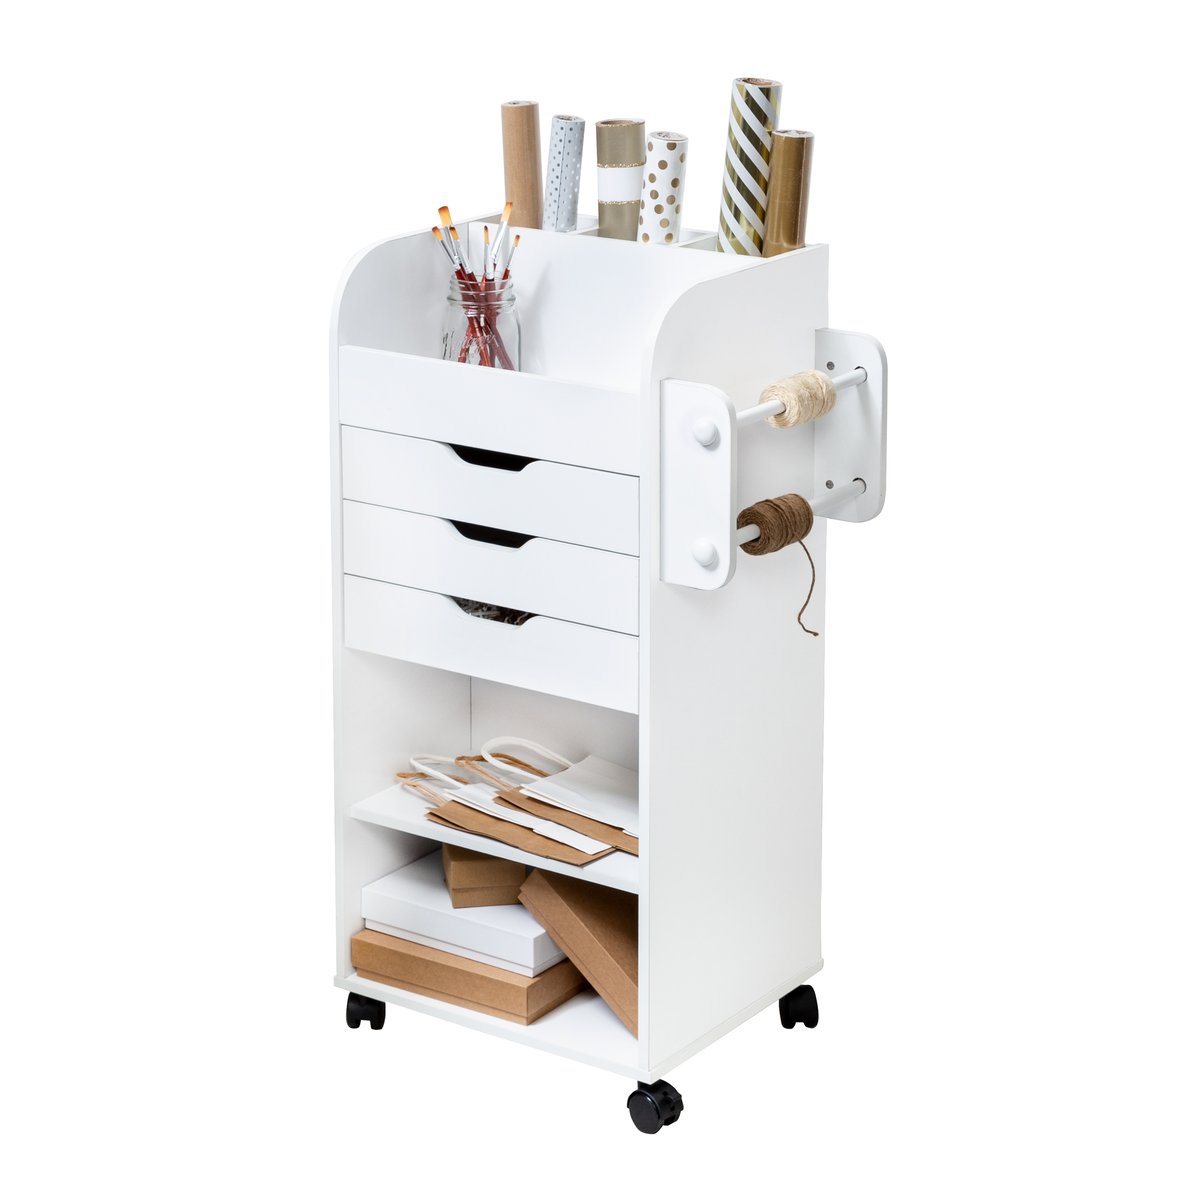 Honey-Can-Do 6-Tier Wood Rolling Craft Storage Cart, White - image 2 of 9